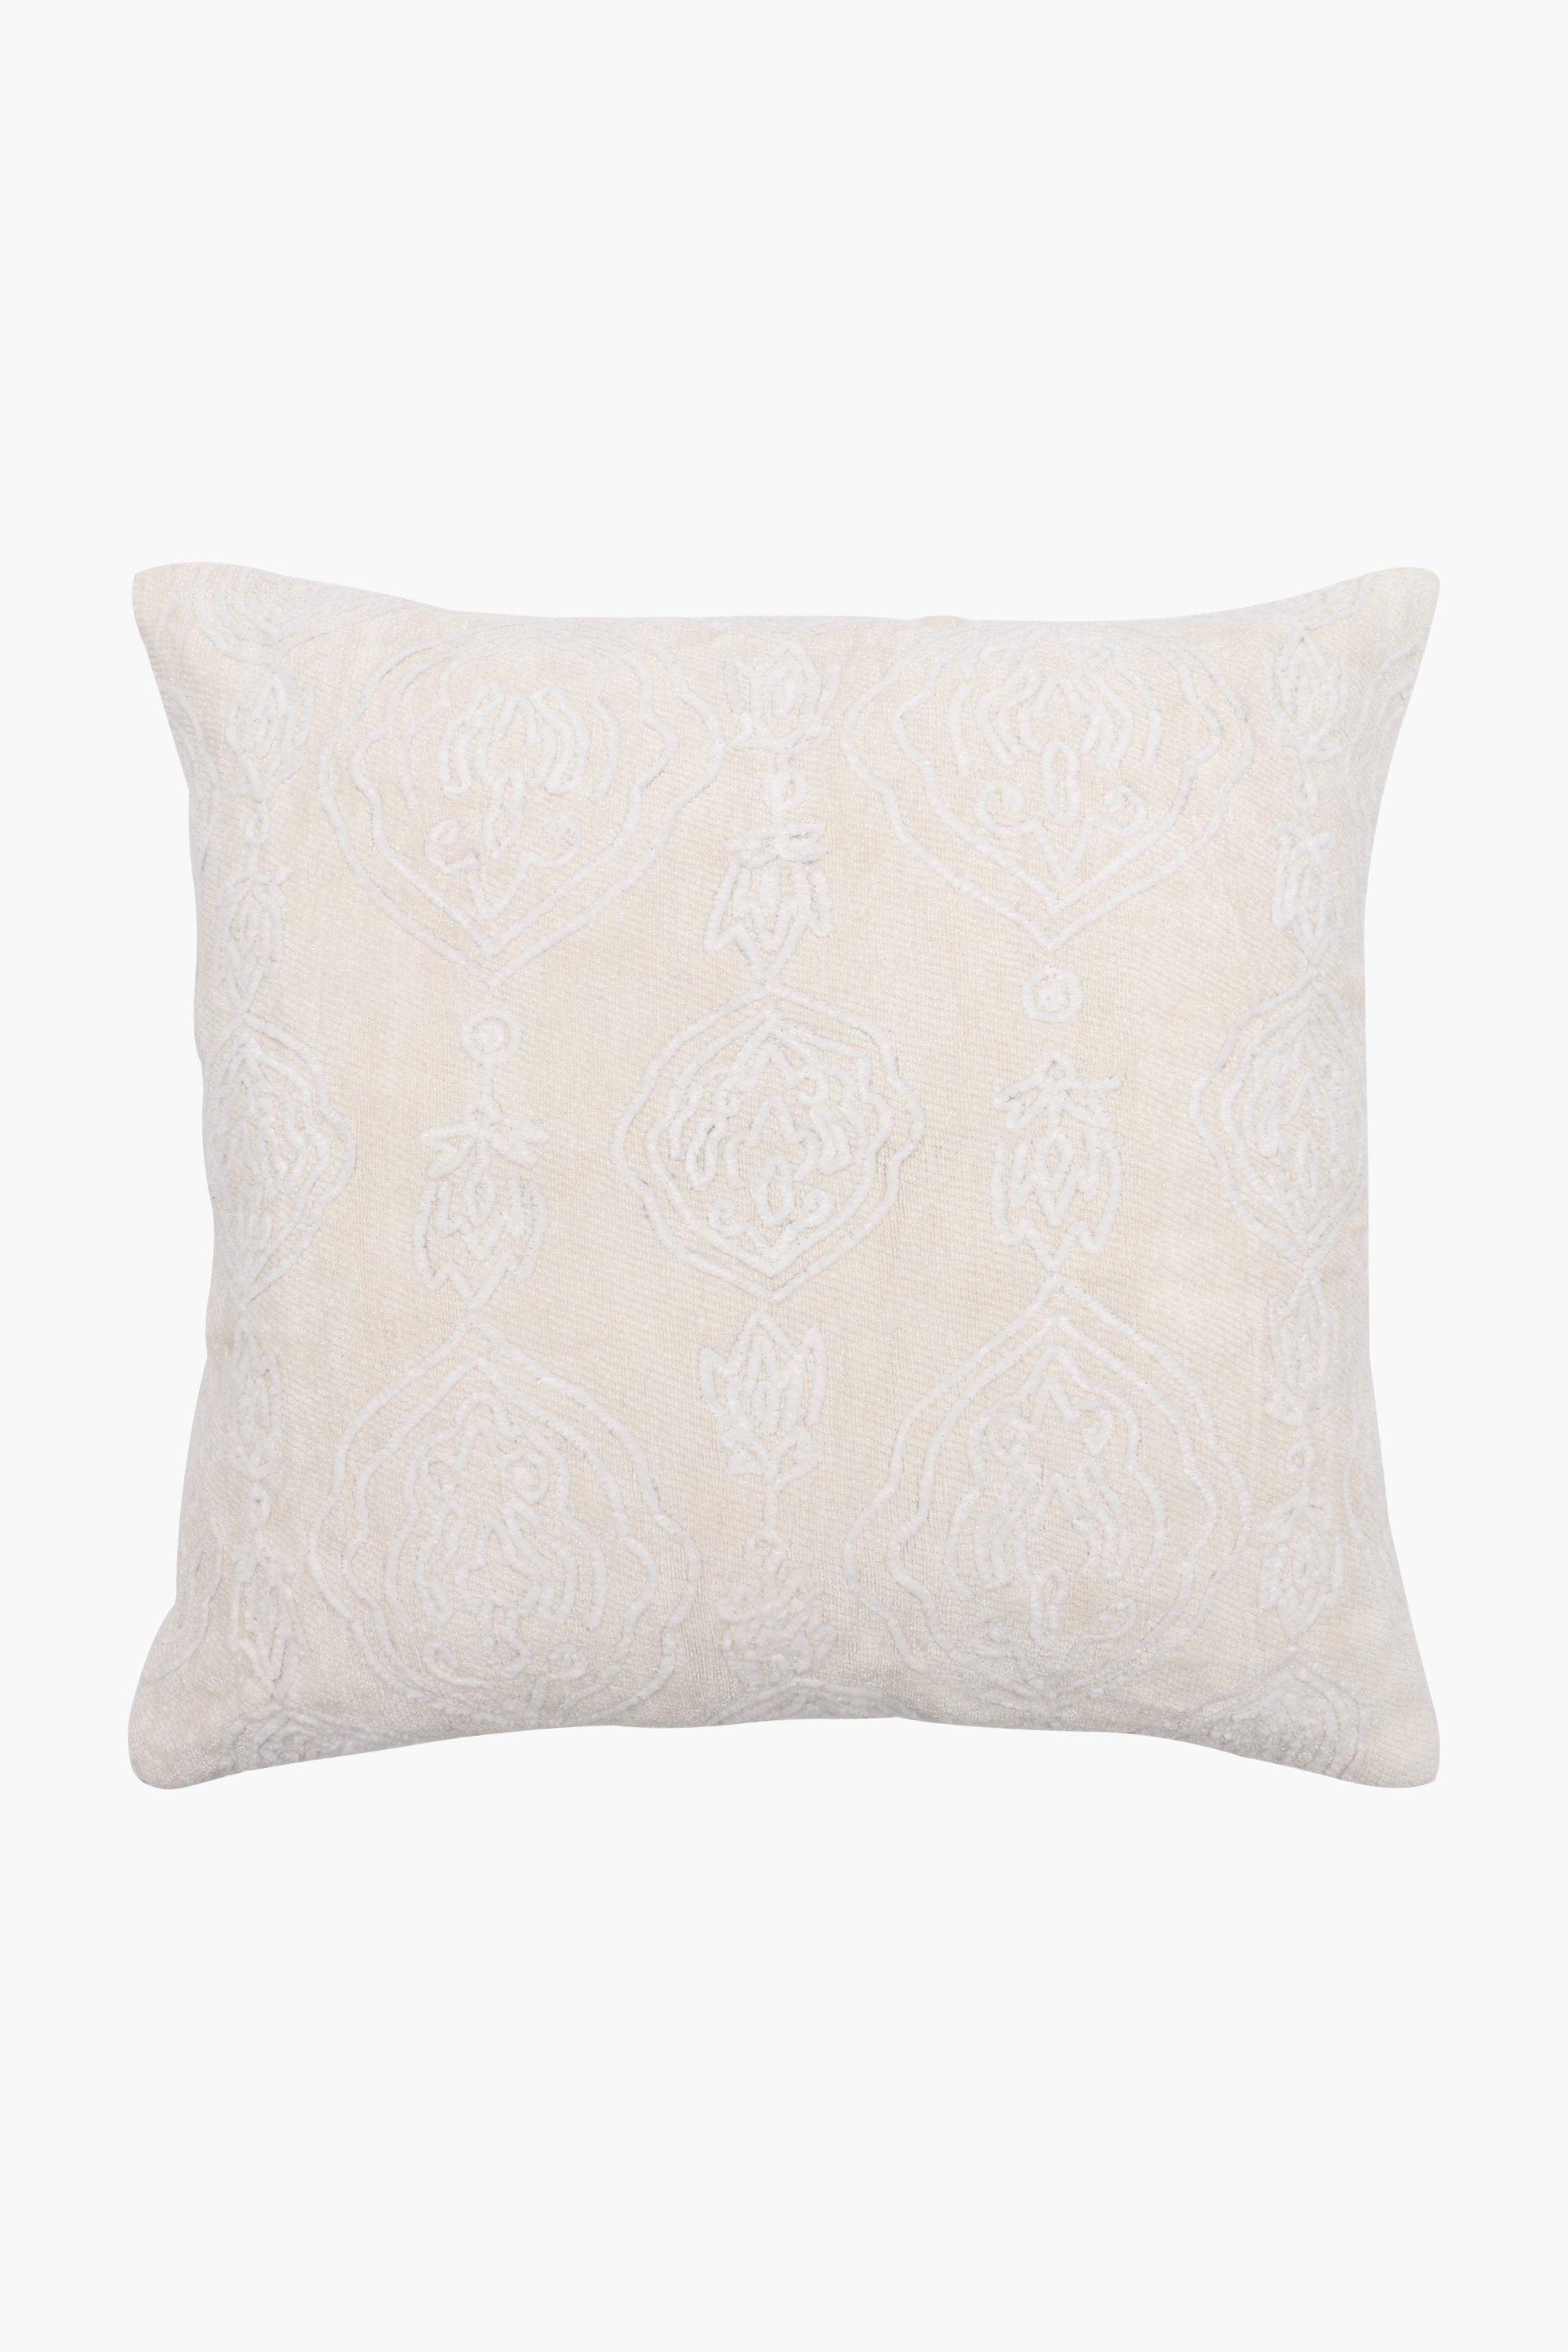 Embroidered Tunis Feather Scatter Cushion, 60x60cm